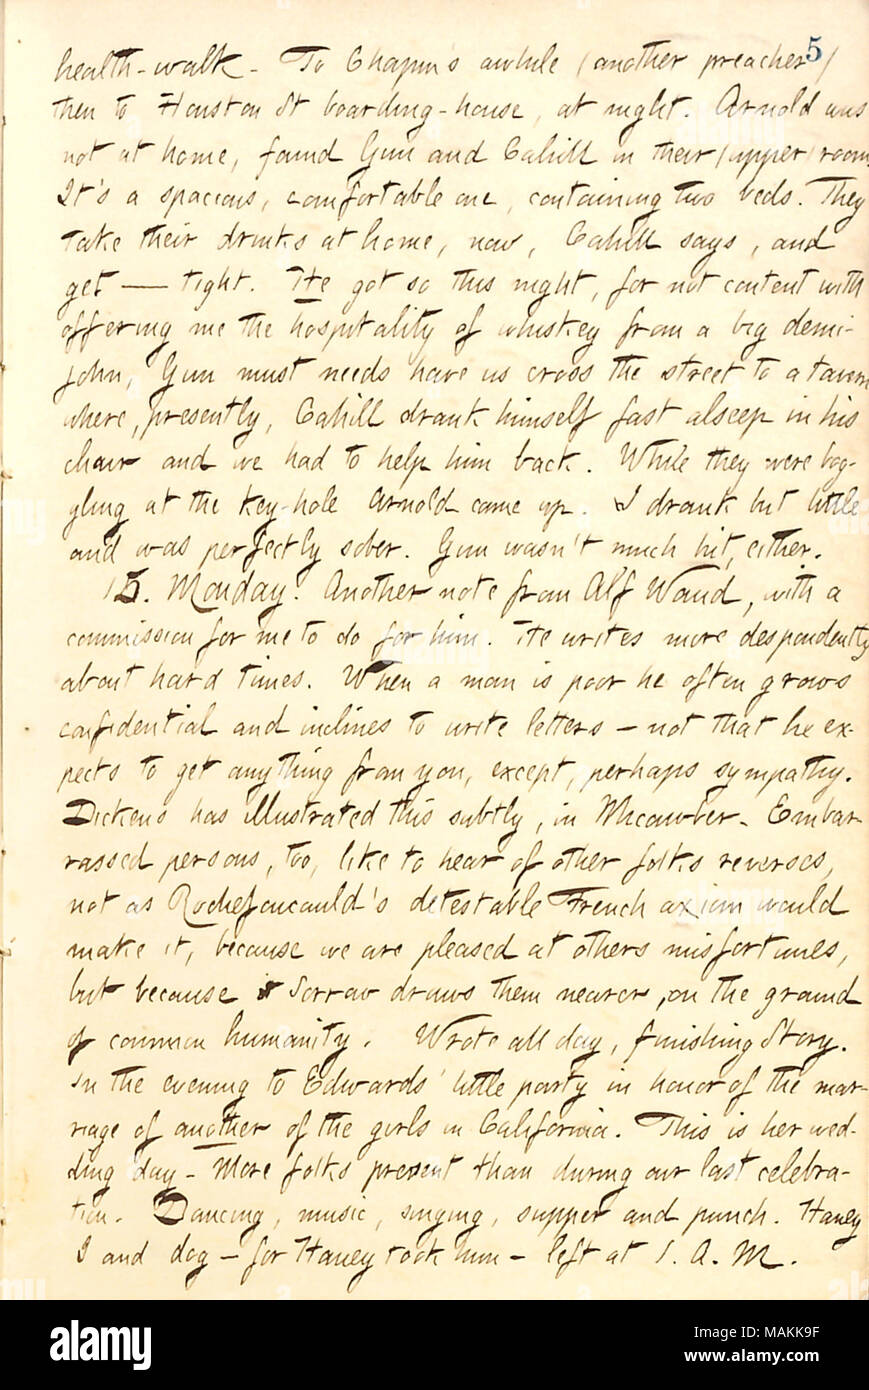 Mentions a night out at a tavern with Frank Cahill and Bob Gun, and receiving a letter from Alf Waud.  Transcription: health-walk. To [E.H.] Chapin ?s awhile (another preacher) then to Houston St boarding-house, at night. [George] Arnold was not at home, found [Bob] Gun and [Frank] Cahill in their (upper) room. It ?s a spacious, comfortable one, containing two beds. They take their drinks at home, now, Cahill says, and get  ? tight. He got so this night, for not content with offering me the hospitality of whiskey from a big demi-john, Gun must needs have us cross the street to a tavern where,  Stock Photo